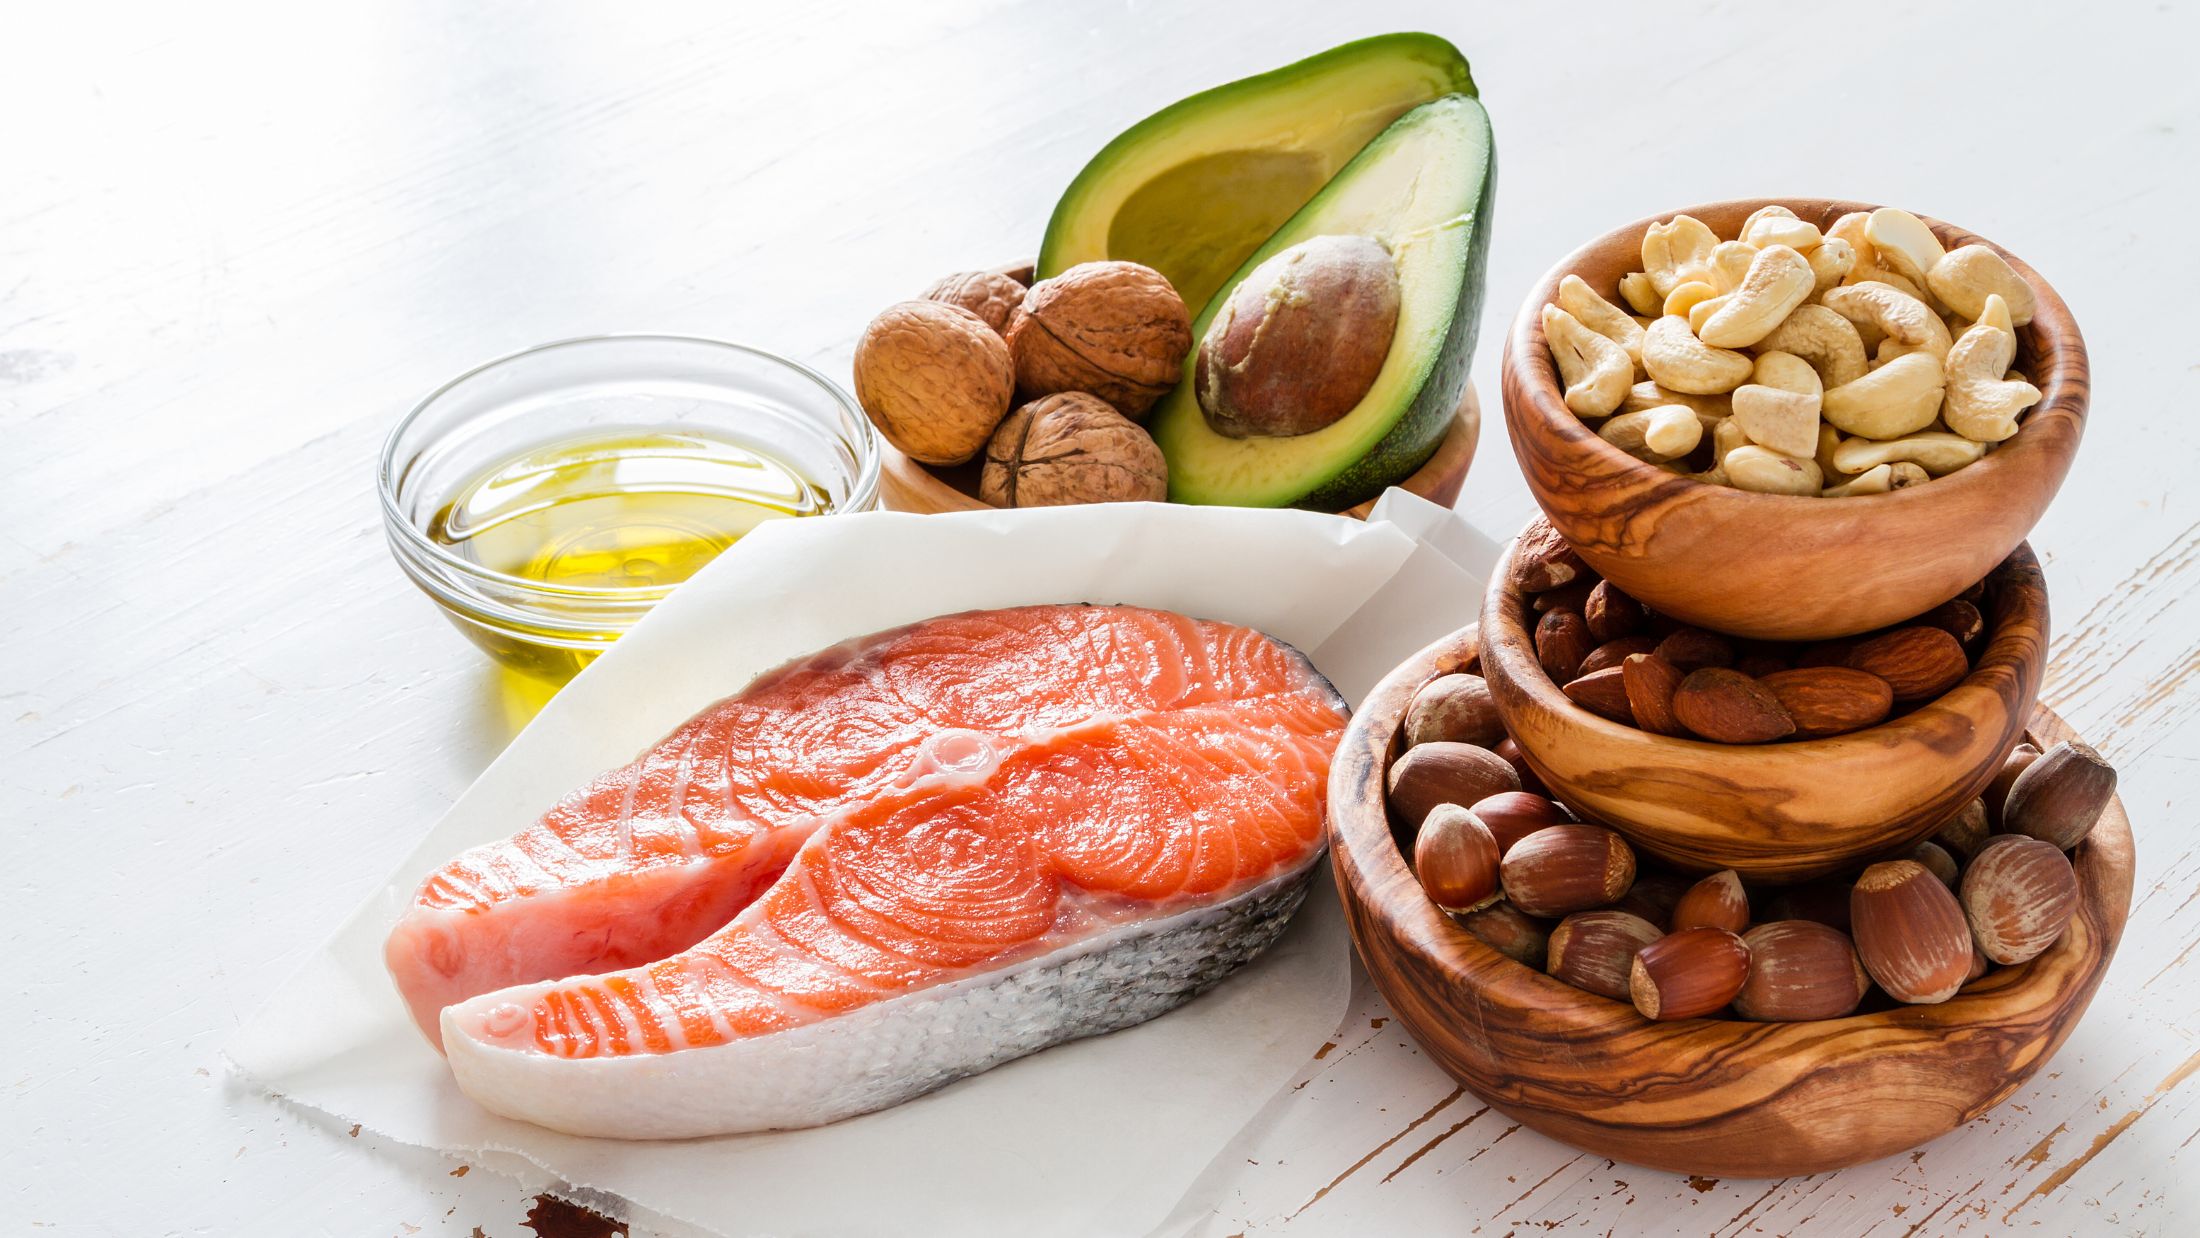 How to choose healthy fats